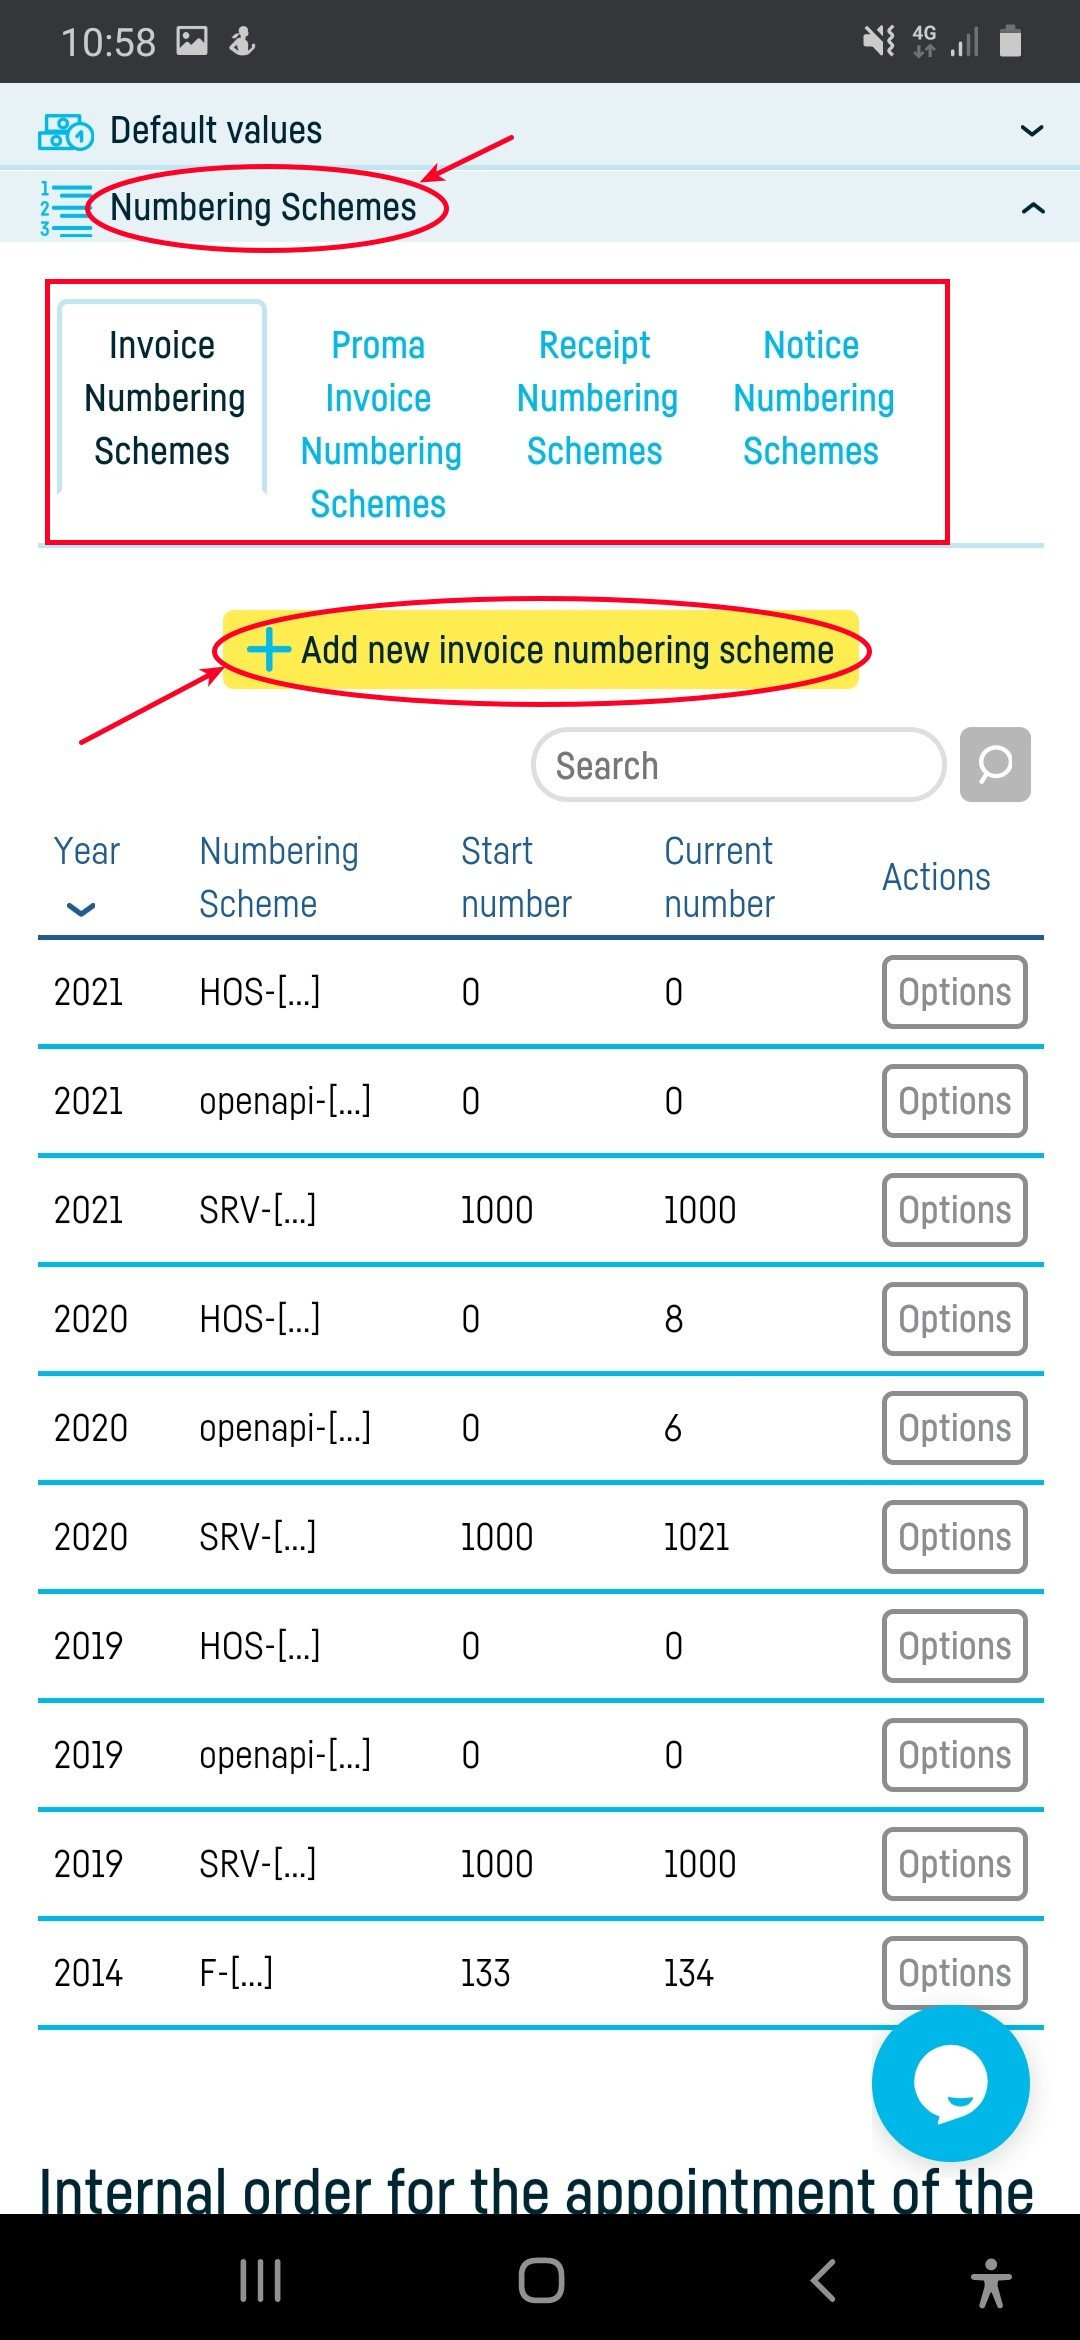 How do I add an invoice numbering scheme? - pasul 2